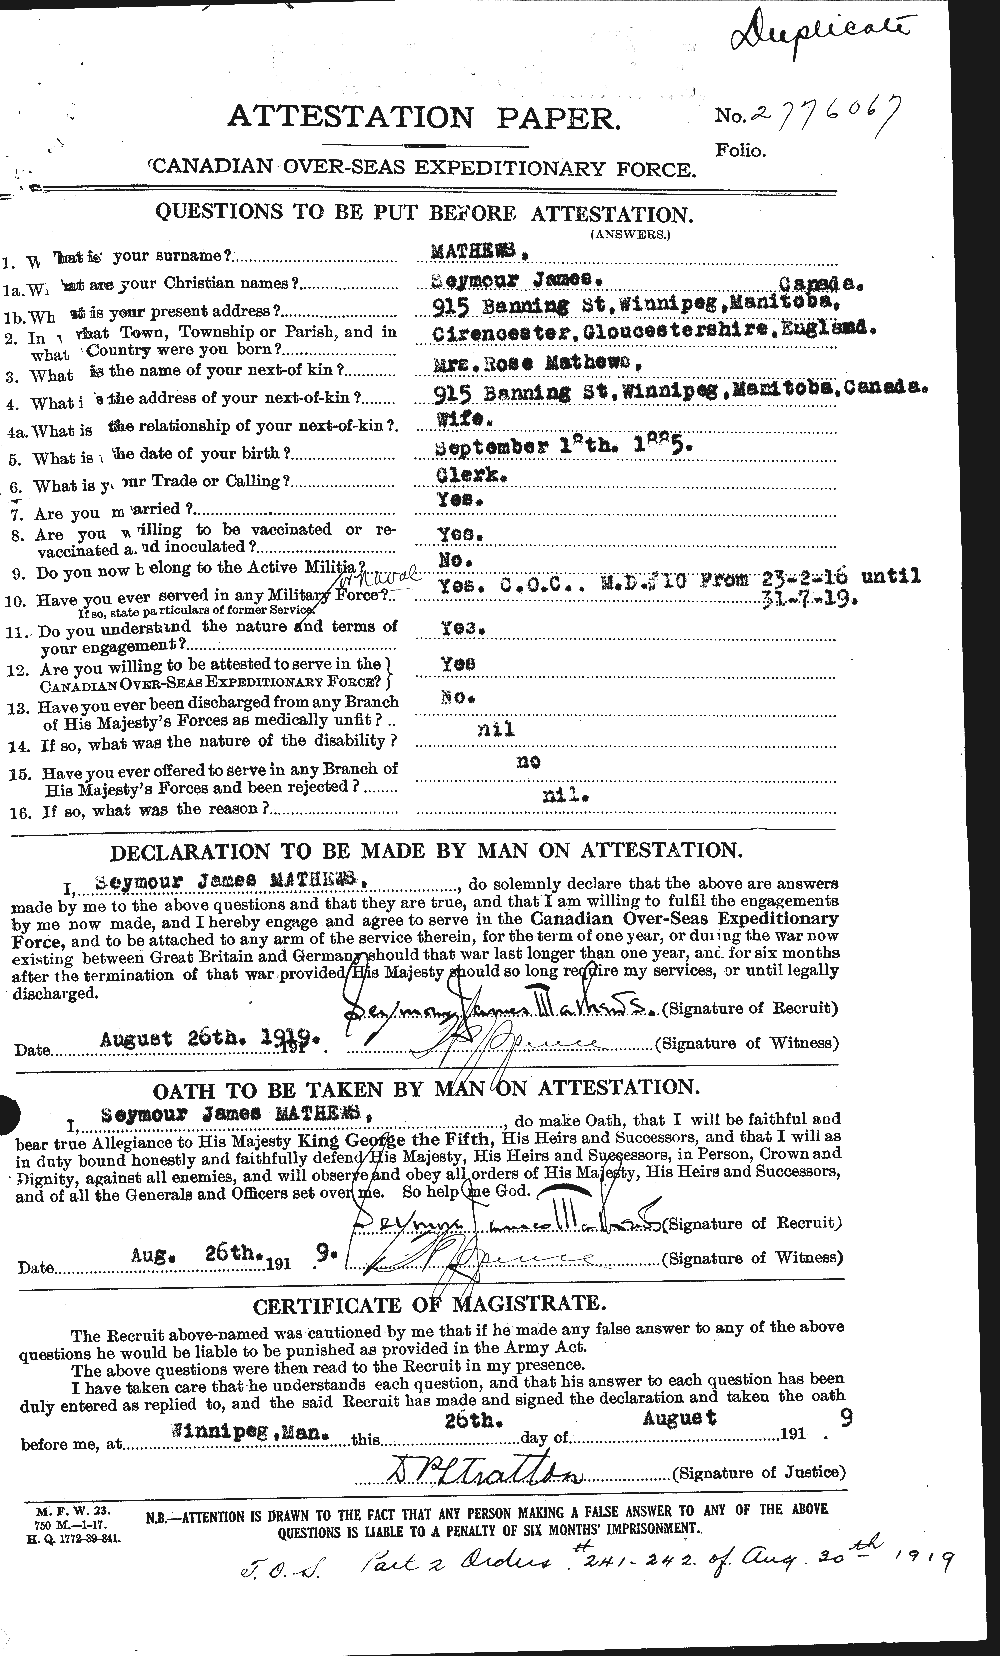 Personnel Records of the First World War - CEF 483962a